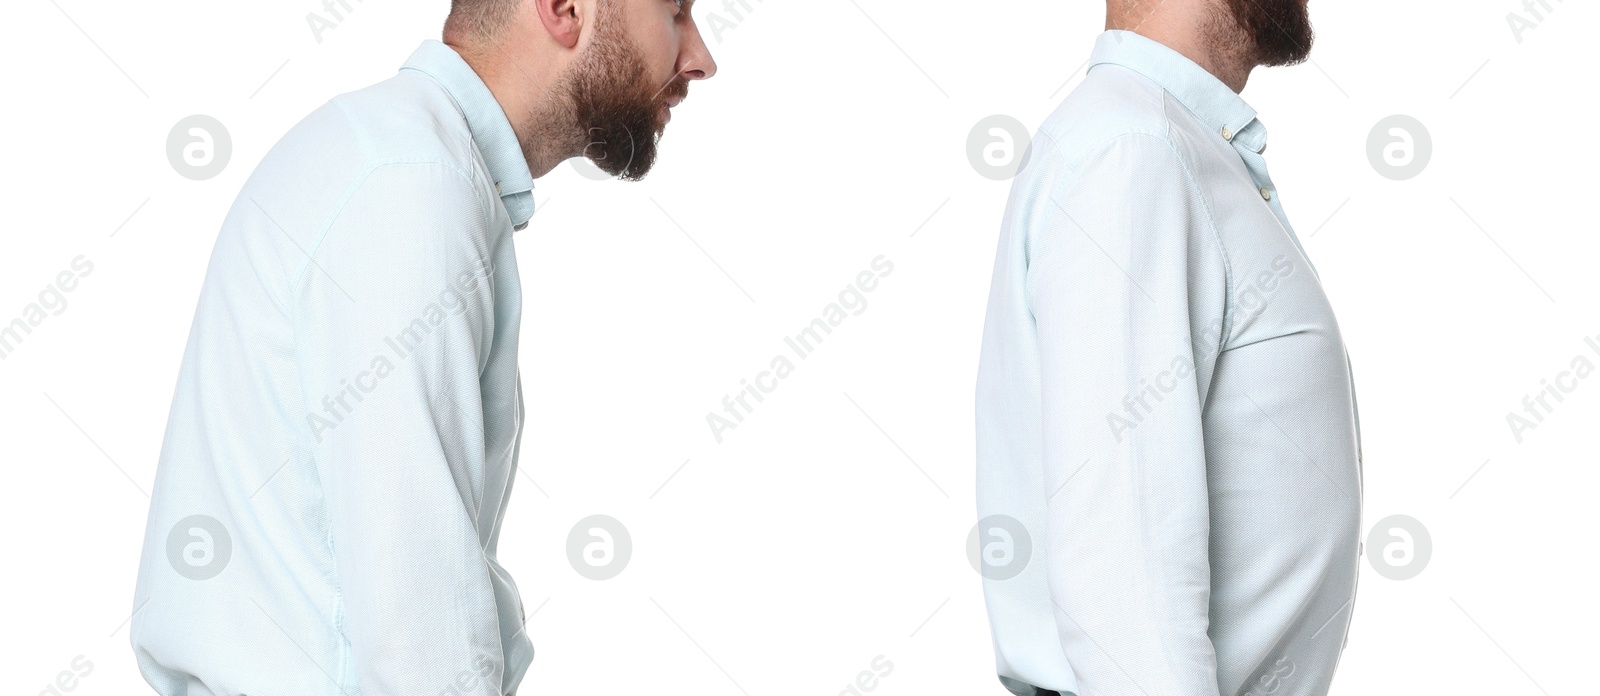 Image of Man with poor and good posture on white background, closeup. Collage of photos